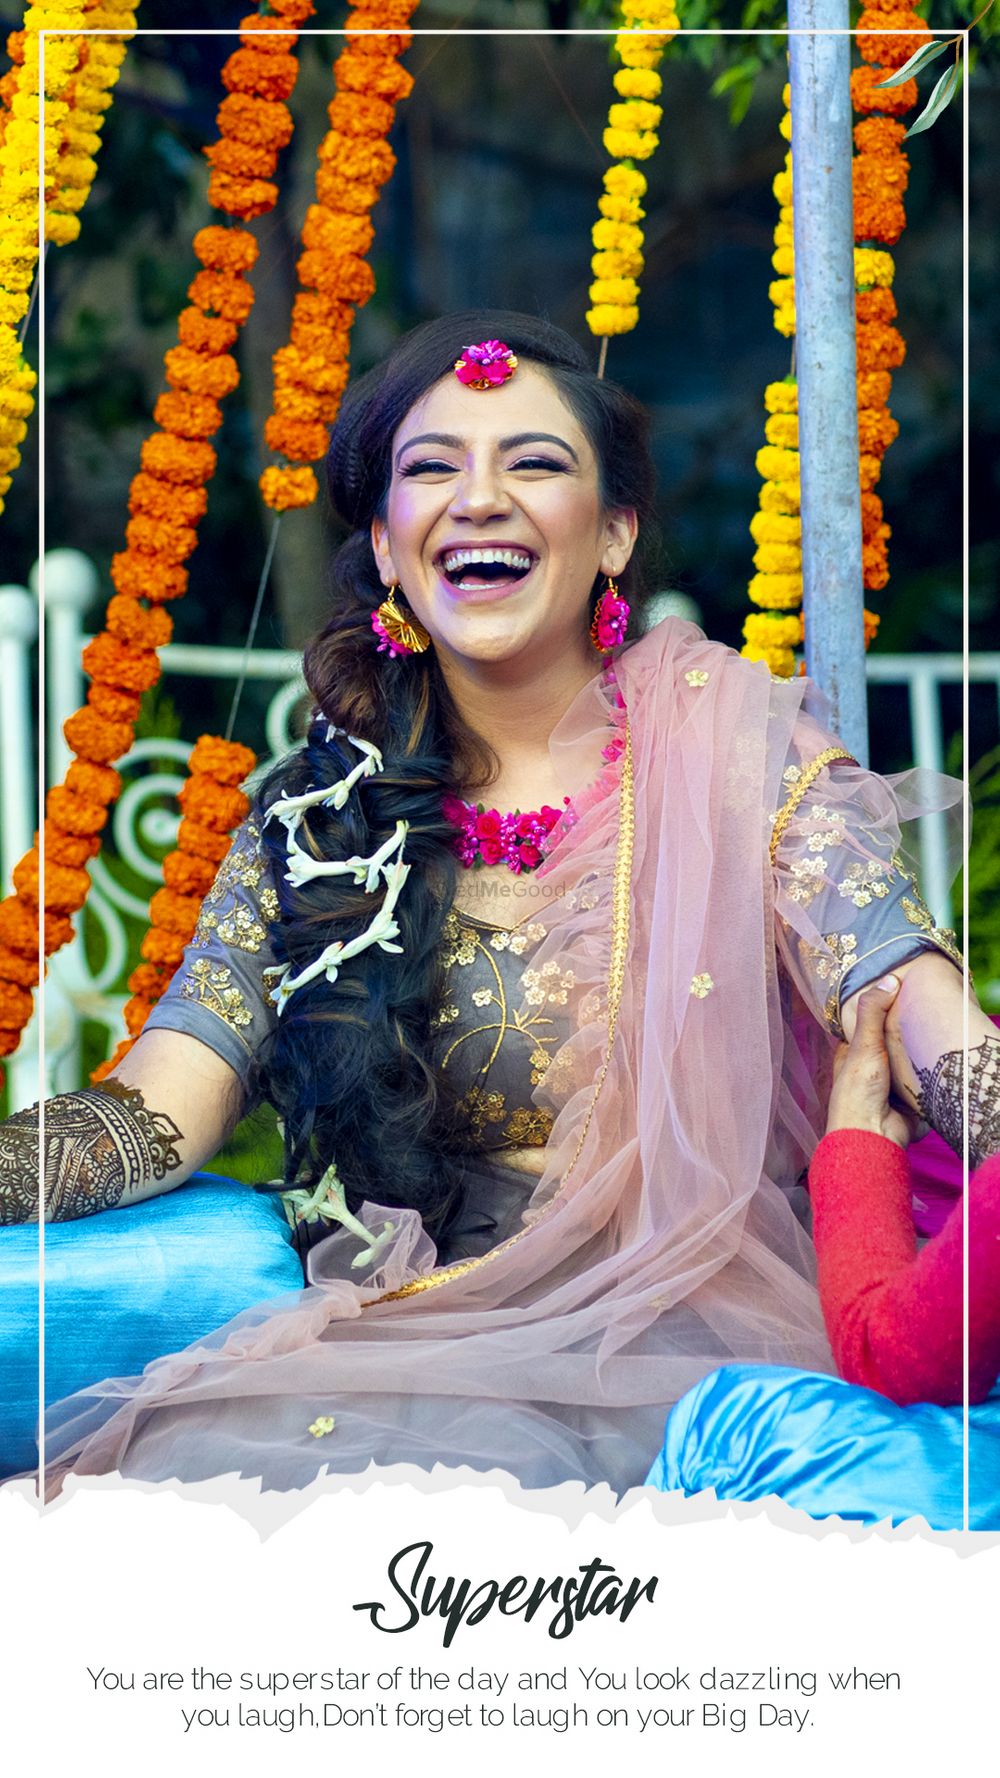 Photo From Mehndi Poses - By Maksiff Studio